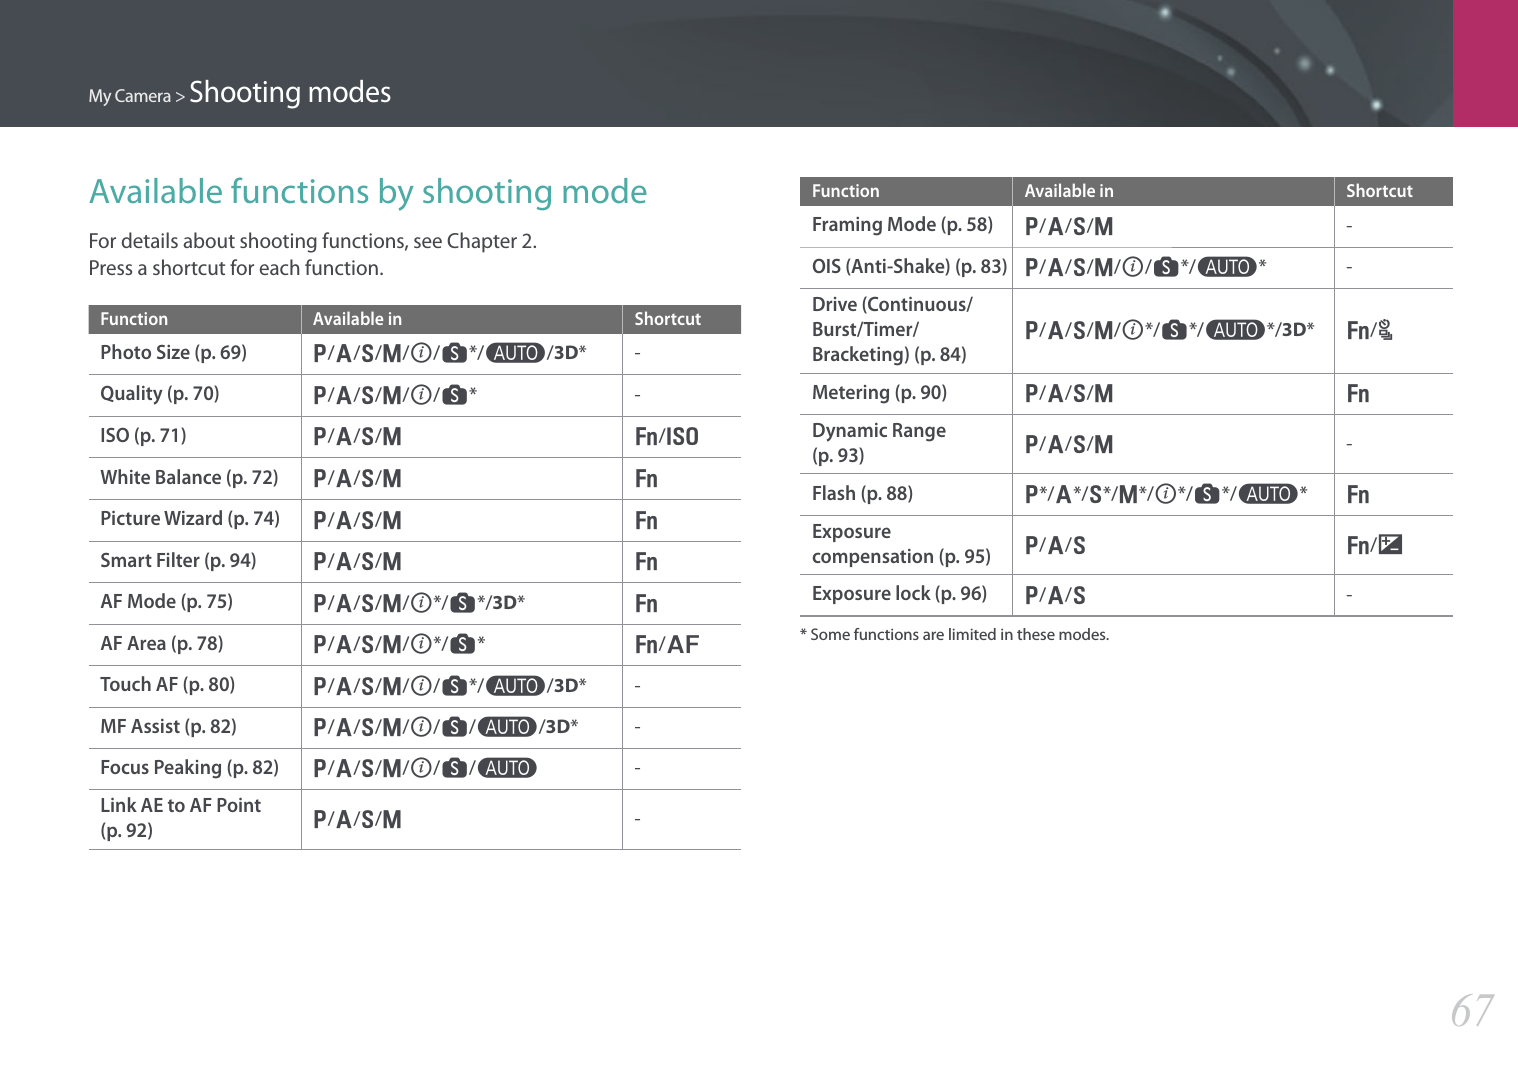 My Camera &gt; Shooting modes67Available functions by shooting modeFor details about shooting functions, see Chapter 2. Press a shortcut for each function.Function Available in ShortcutPhoto Size (p. 69)P/A/S/M/i/s*/t/3D*-Quality (p. 70)P/A/S/M/i/s*-ISO (p. 71)P/A/S/Mf/IWhite Balance (p. 72)P/A/S/MfPicture Wizard (p. 74)P/A/S/MfSmart Filter (p. 94)P/A/S/MfAF Mode (p. 75)P/A/S/M/i*/s*/3D*fAF Area (p. 78)P/A/S/M/i*/s*f/FTouch AF (p. 80)P/A/S/M/i/s*/t/3D*-MF Assist (p. 82)P/A/S/M/i/s/t/3D*-Focus Peaking (p. 82)P/A/S/M/i/s/t-Link AE to AF Point  (p. 92)P/A/S/M-Function Available in ShortcutFraming Mode (p. 58)P/A/S/M-OIS (Anti-Shake) (p. 83)P/A/S/M/i/s*/t*-Drive (Continuous/Burst/Timer/Bracketing) (p. 84)P/A/S/M/i*/s*/t*/3D*f/CMetering (p. 90)P/A/S/MfDynamic Range  (p. 93)P/A/S/M-Flash (p. 88)P*/A*/S*/M*/i*/s*/t*fExposure compensation (p. 95)P/A/Sf/WExposure lock (p. 96)P/A/S-*  Some functions are limited in these modes.